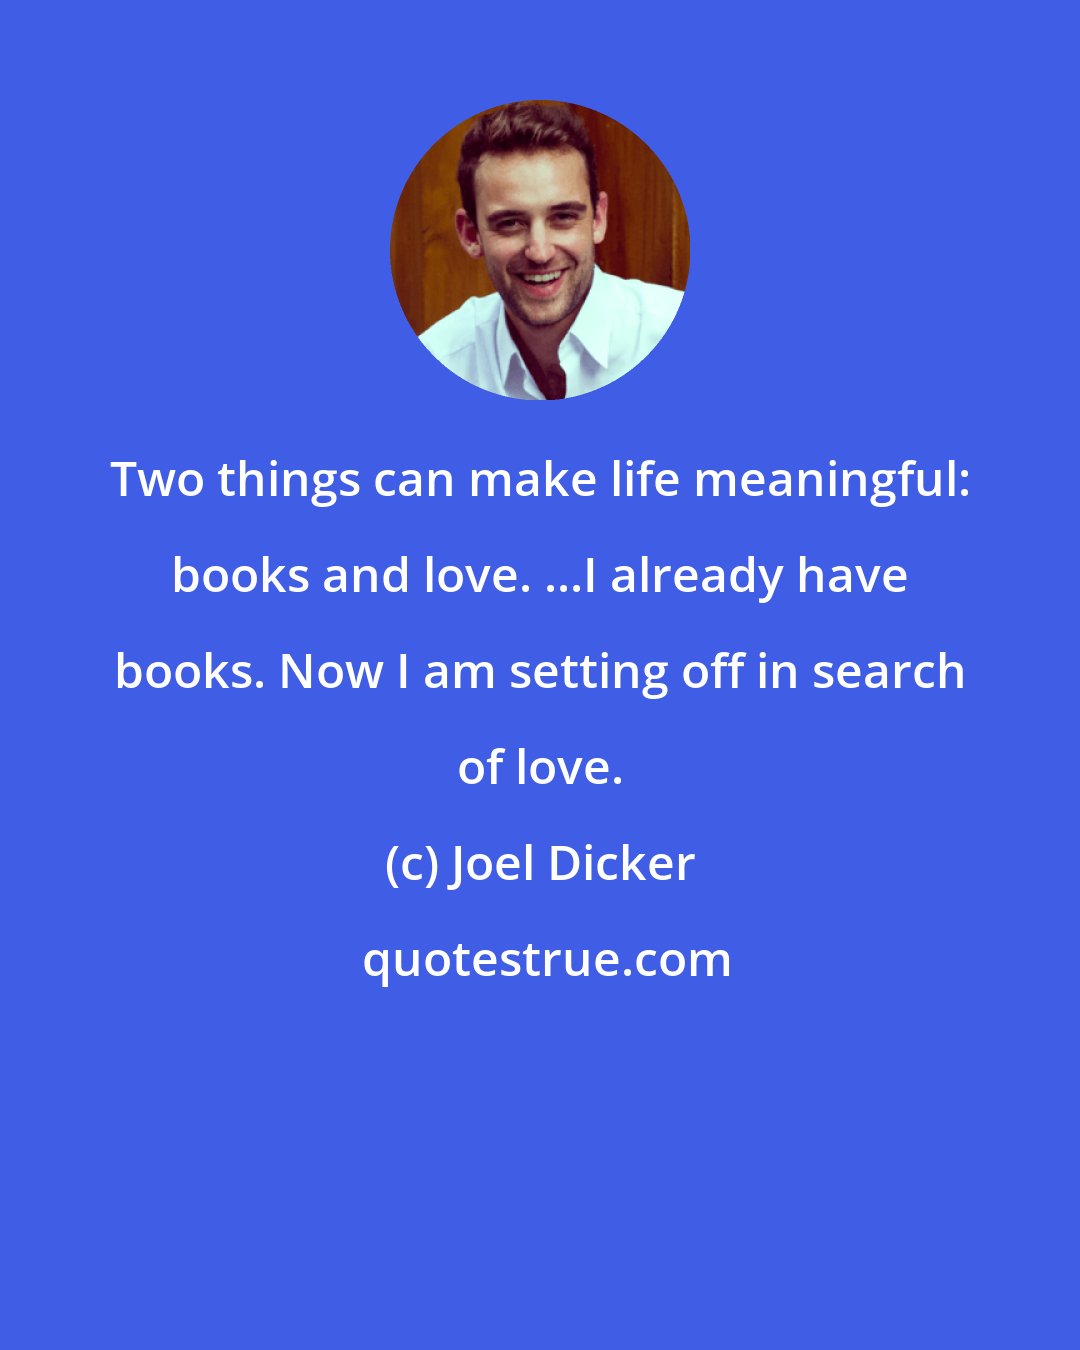 Joel Dicker: Two things can make life meaningful: books and love. ...I already have books. Now I am setting off in search of love.